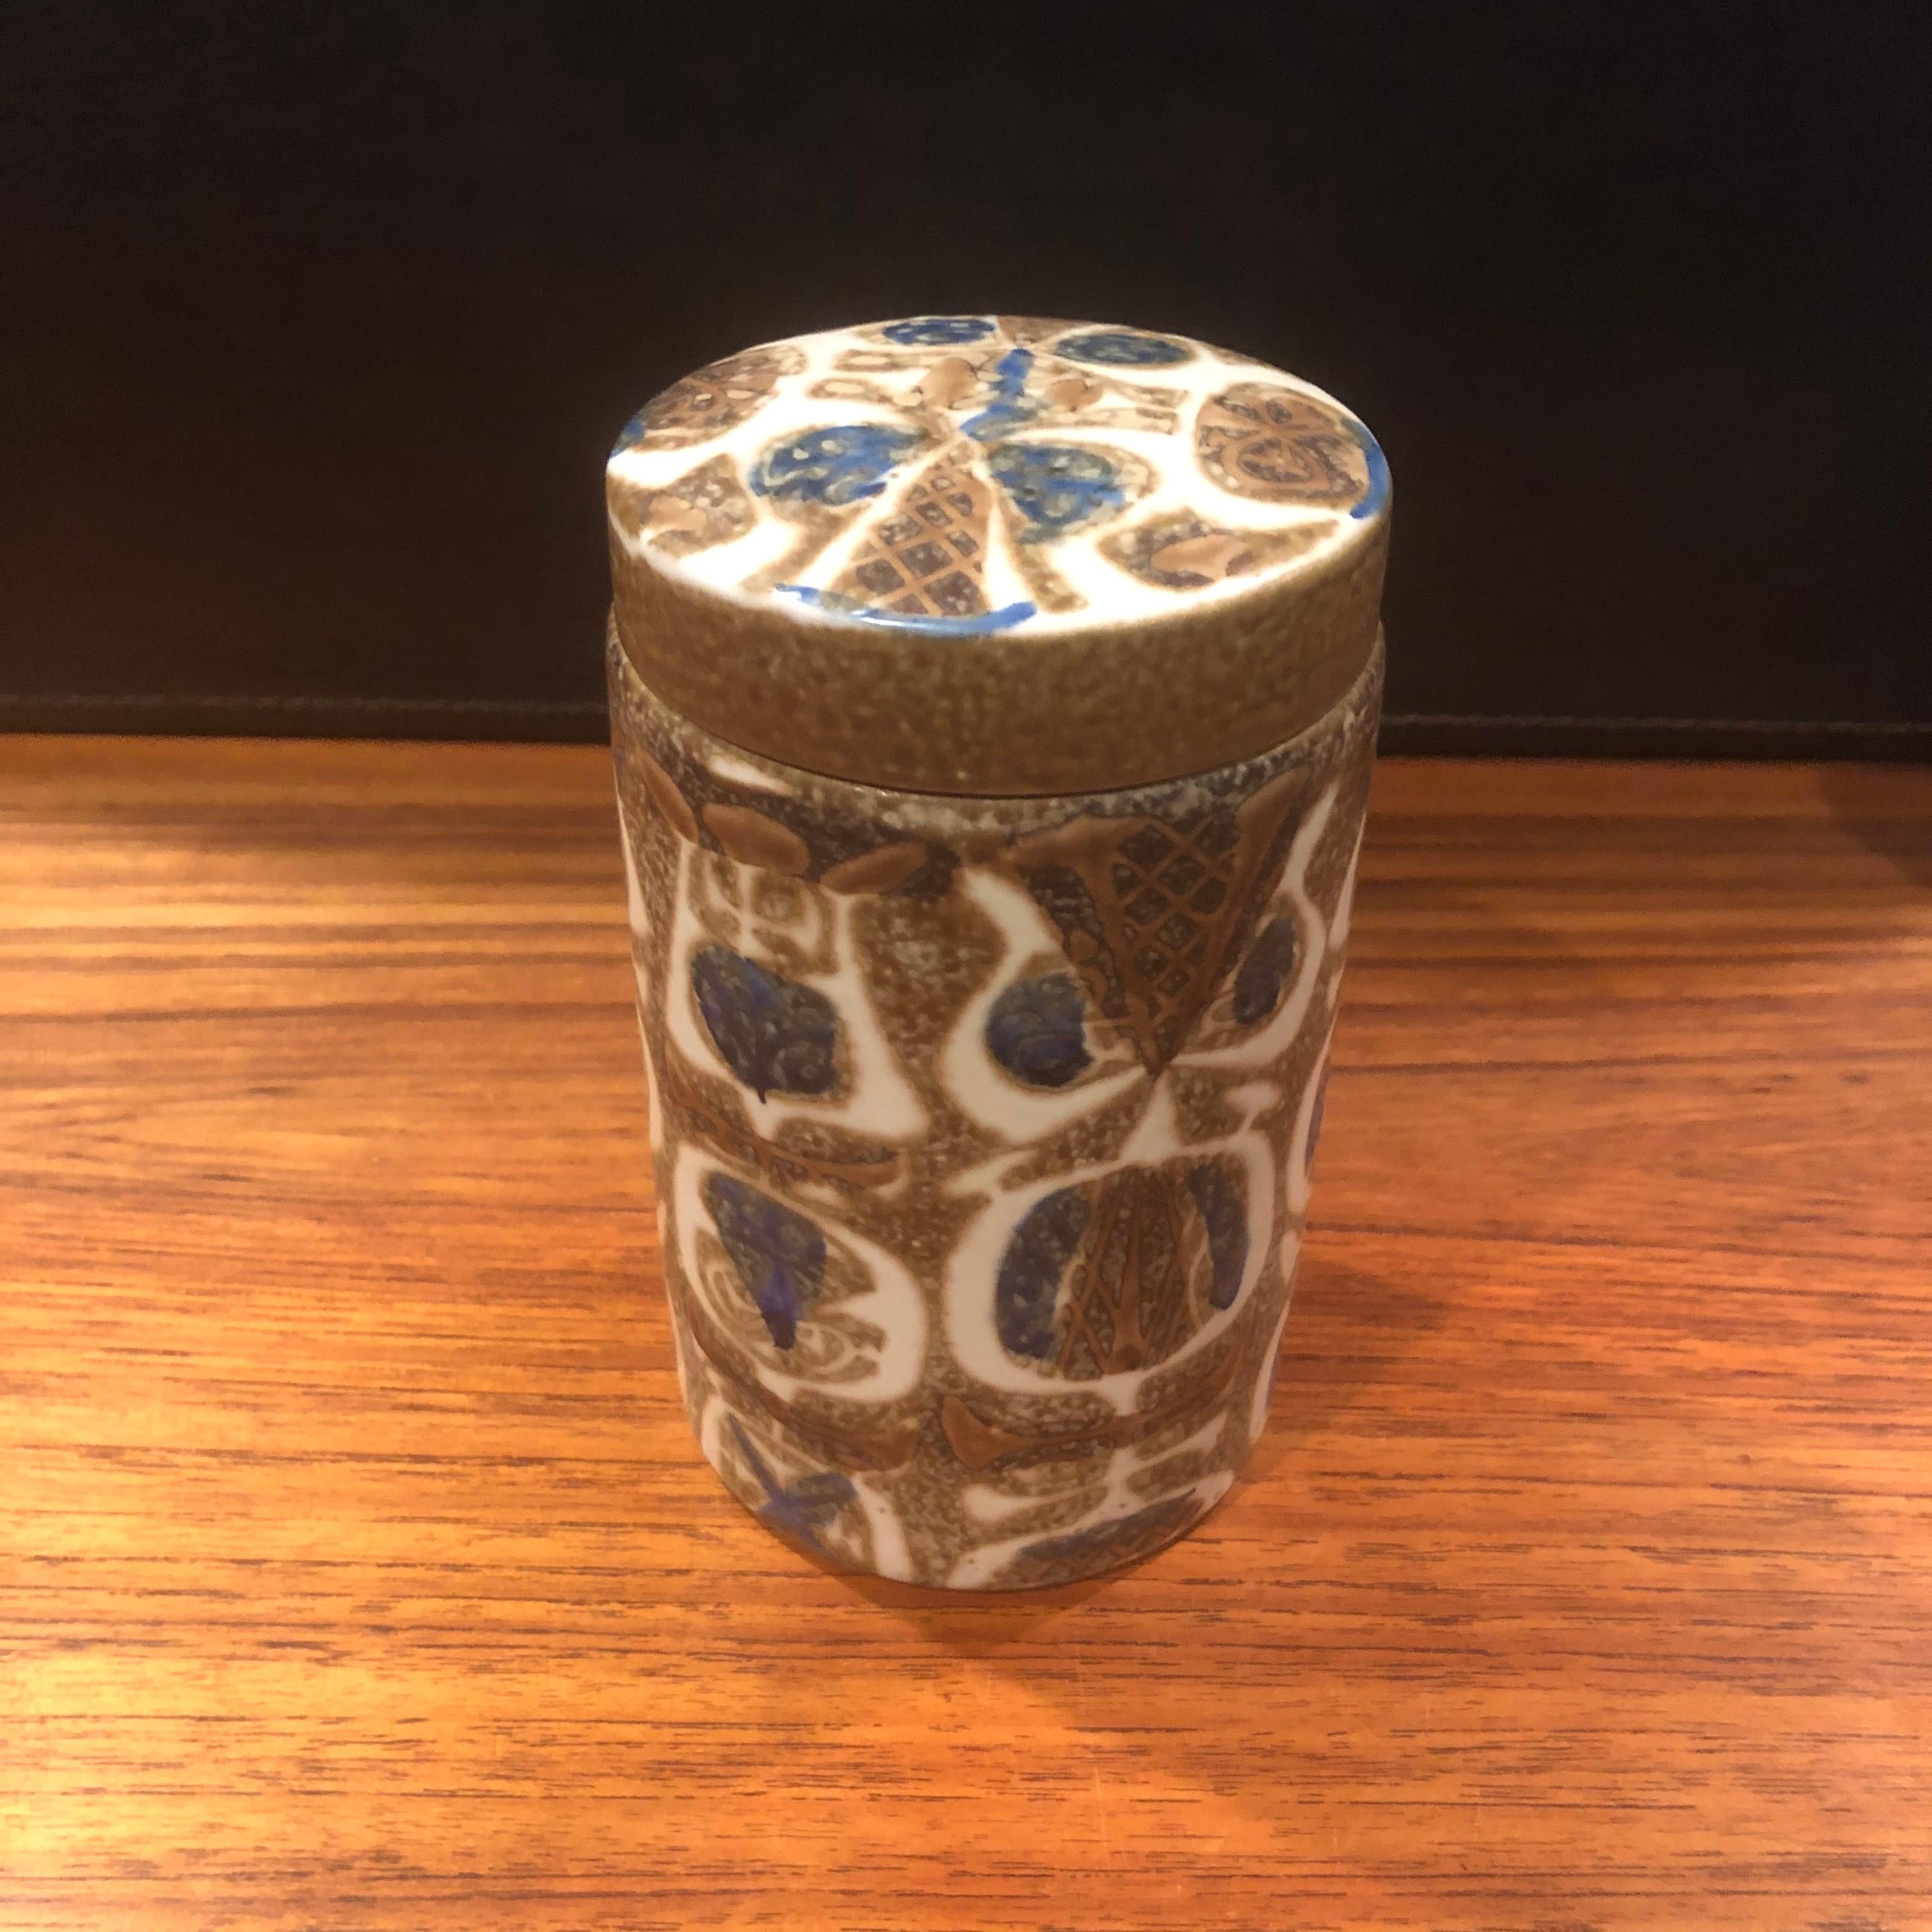 Fajance ceramic lidded jar / humidor from the Baca line by Nils Thorsson for Royal Copenhagen, circa 1960s. The Brown, tan and blue glazed stoneware jar with geometric abstract design in relief was designed by Royal Copenhagen's renowned artistic